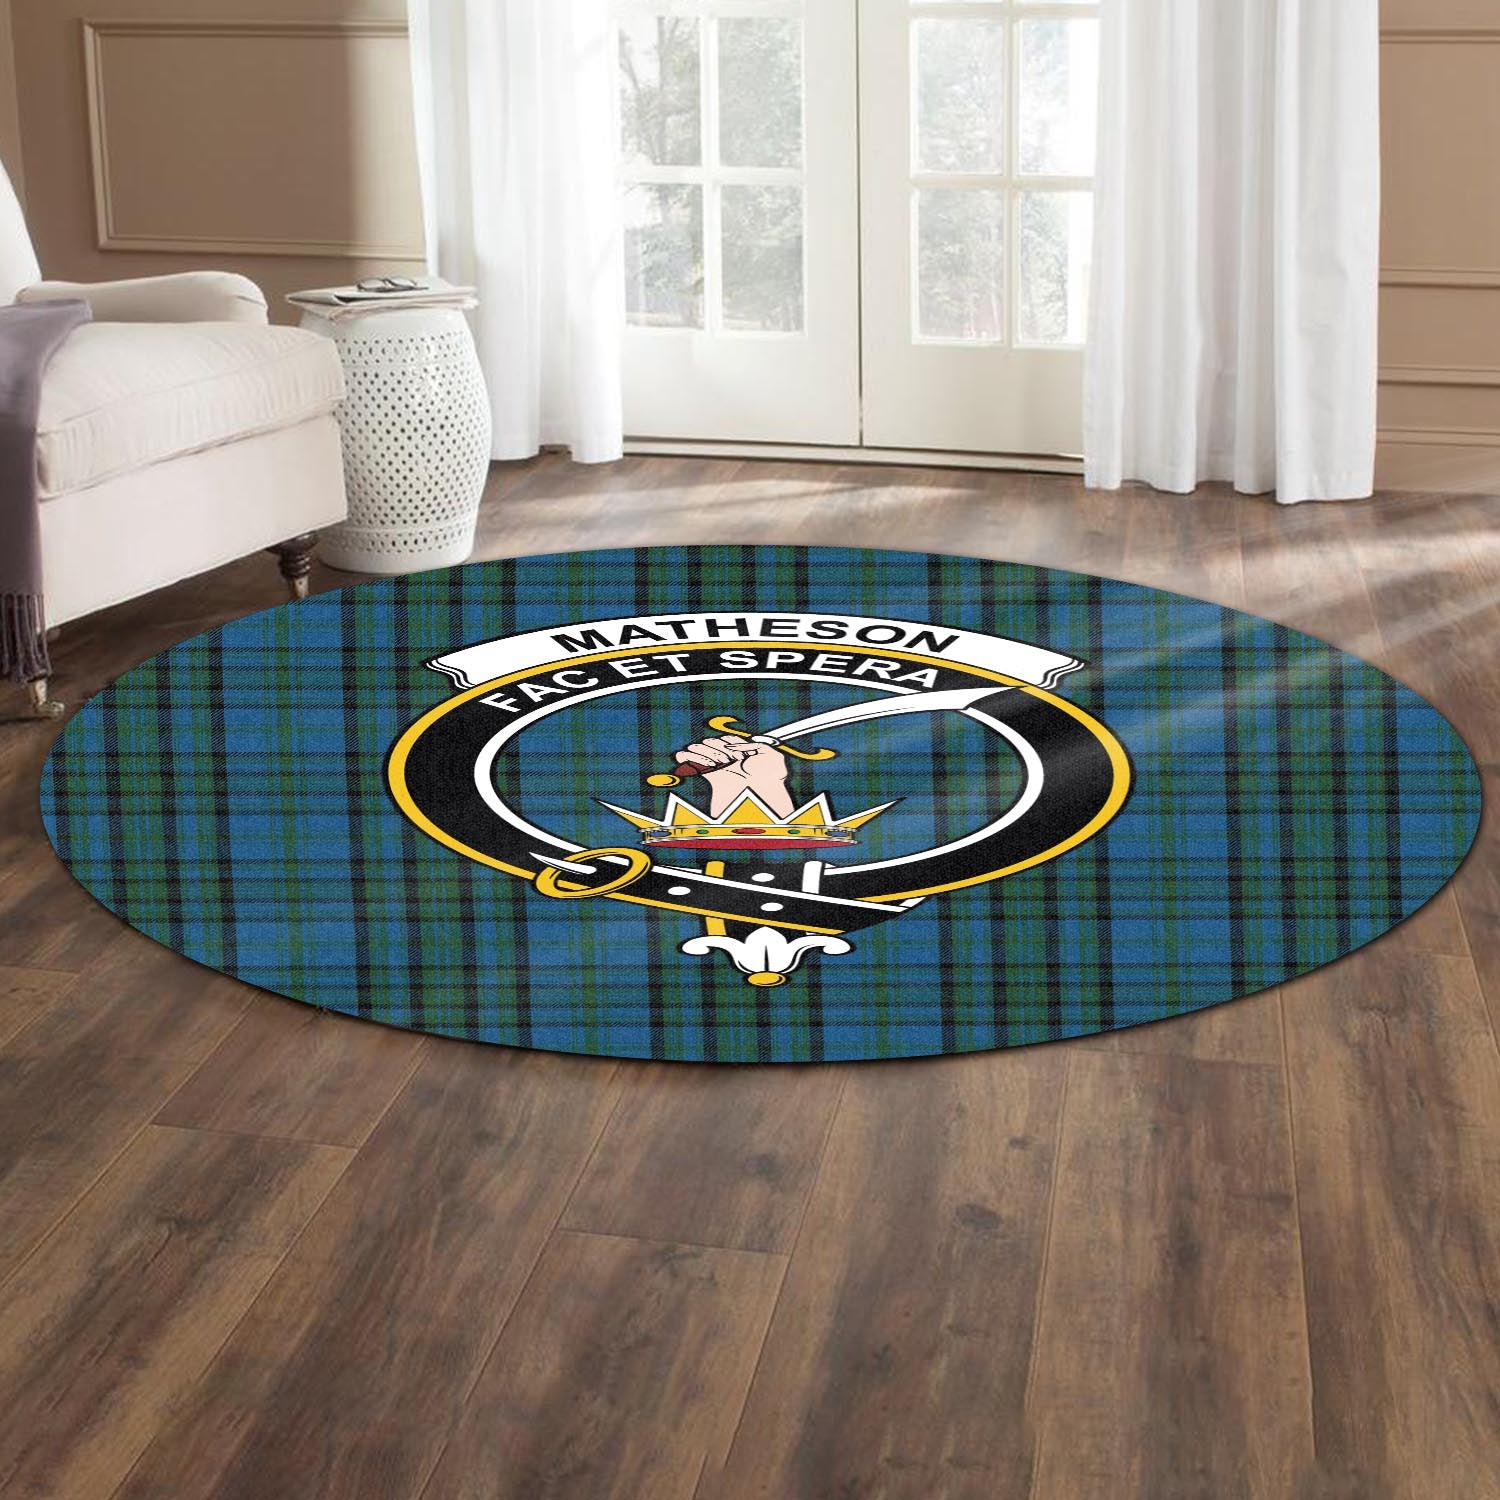 matheson-hunting-tartan-round-rug-with-family-crest